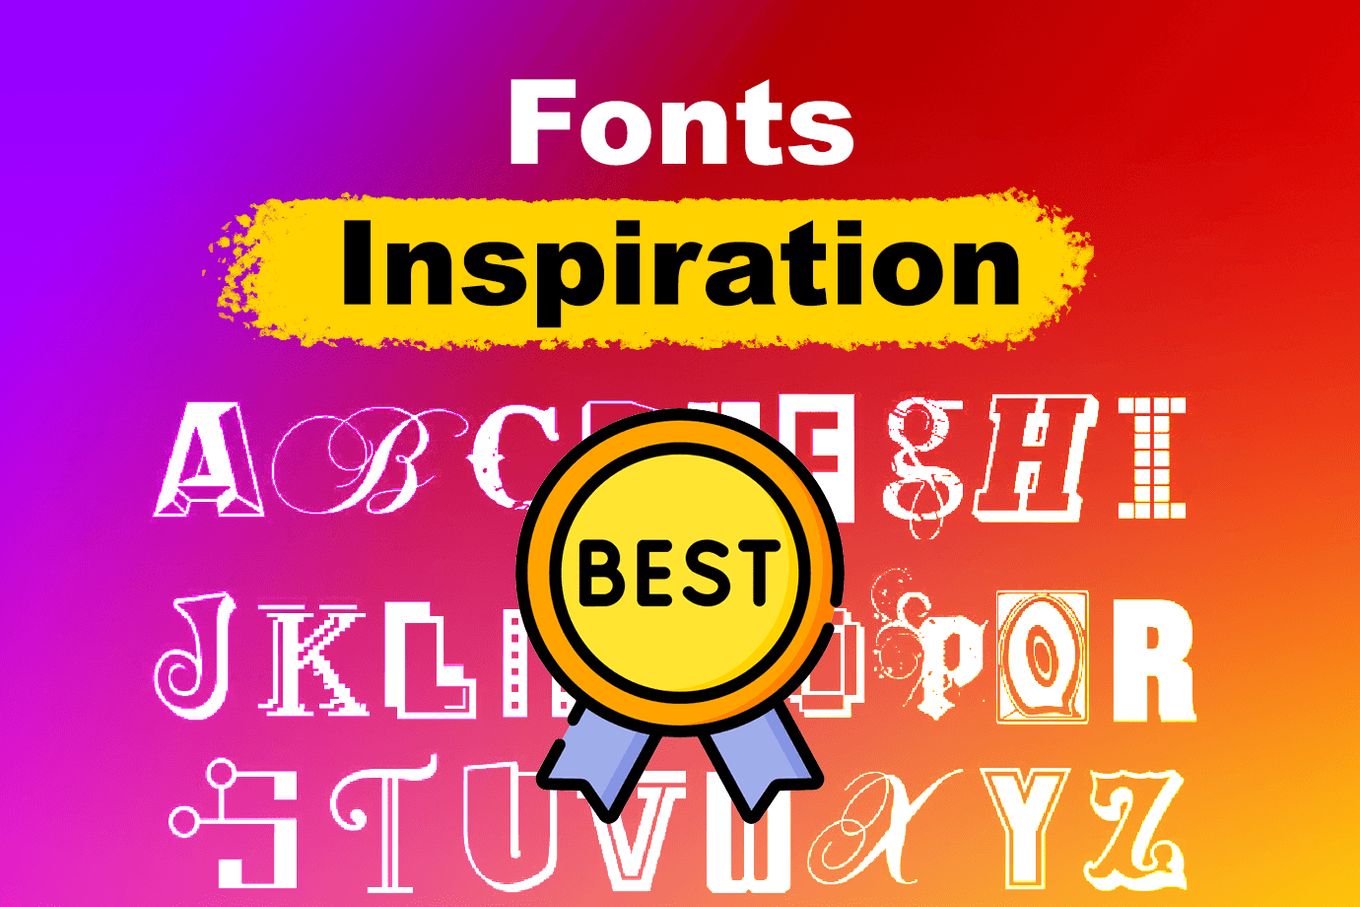 9 Sites to Find Font Inspiration [Trends, Ideas and more] - Alvaro